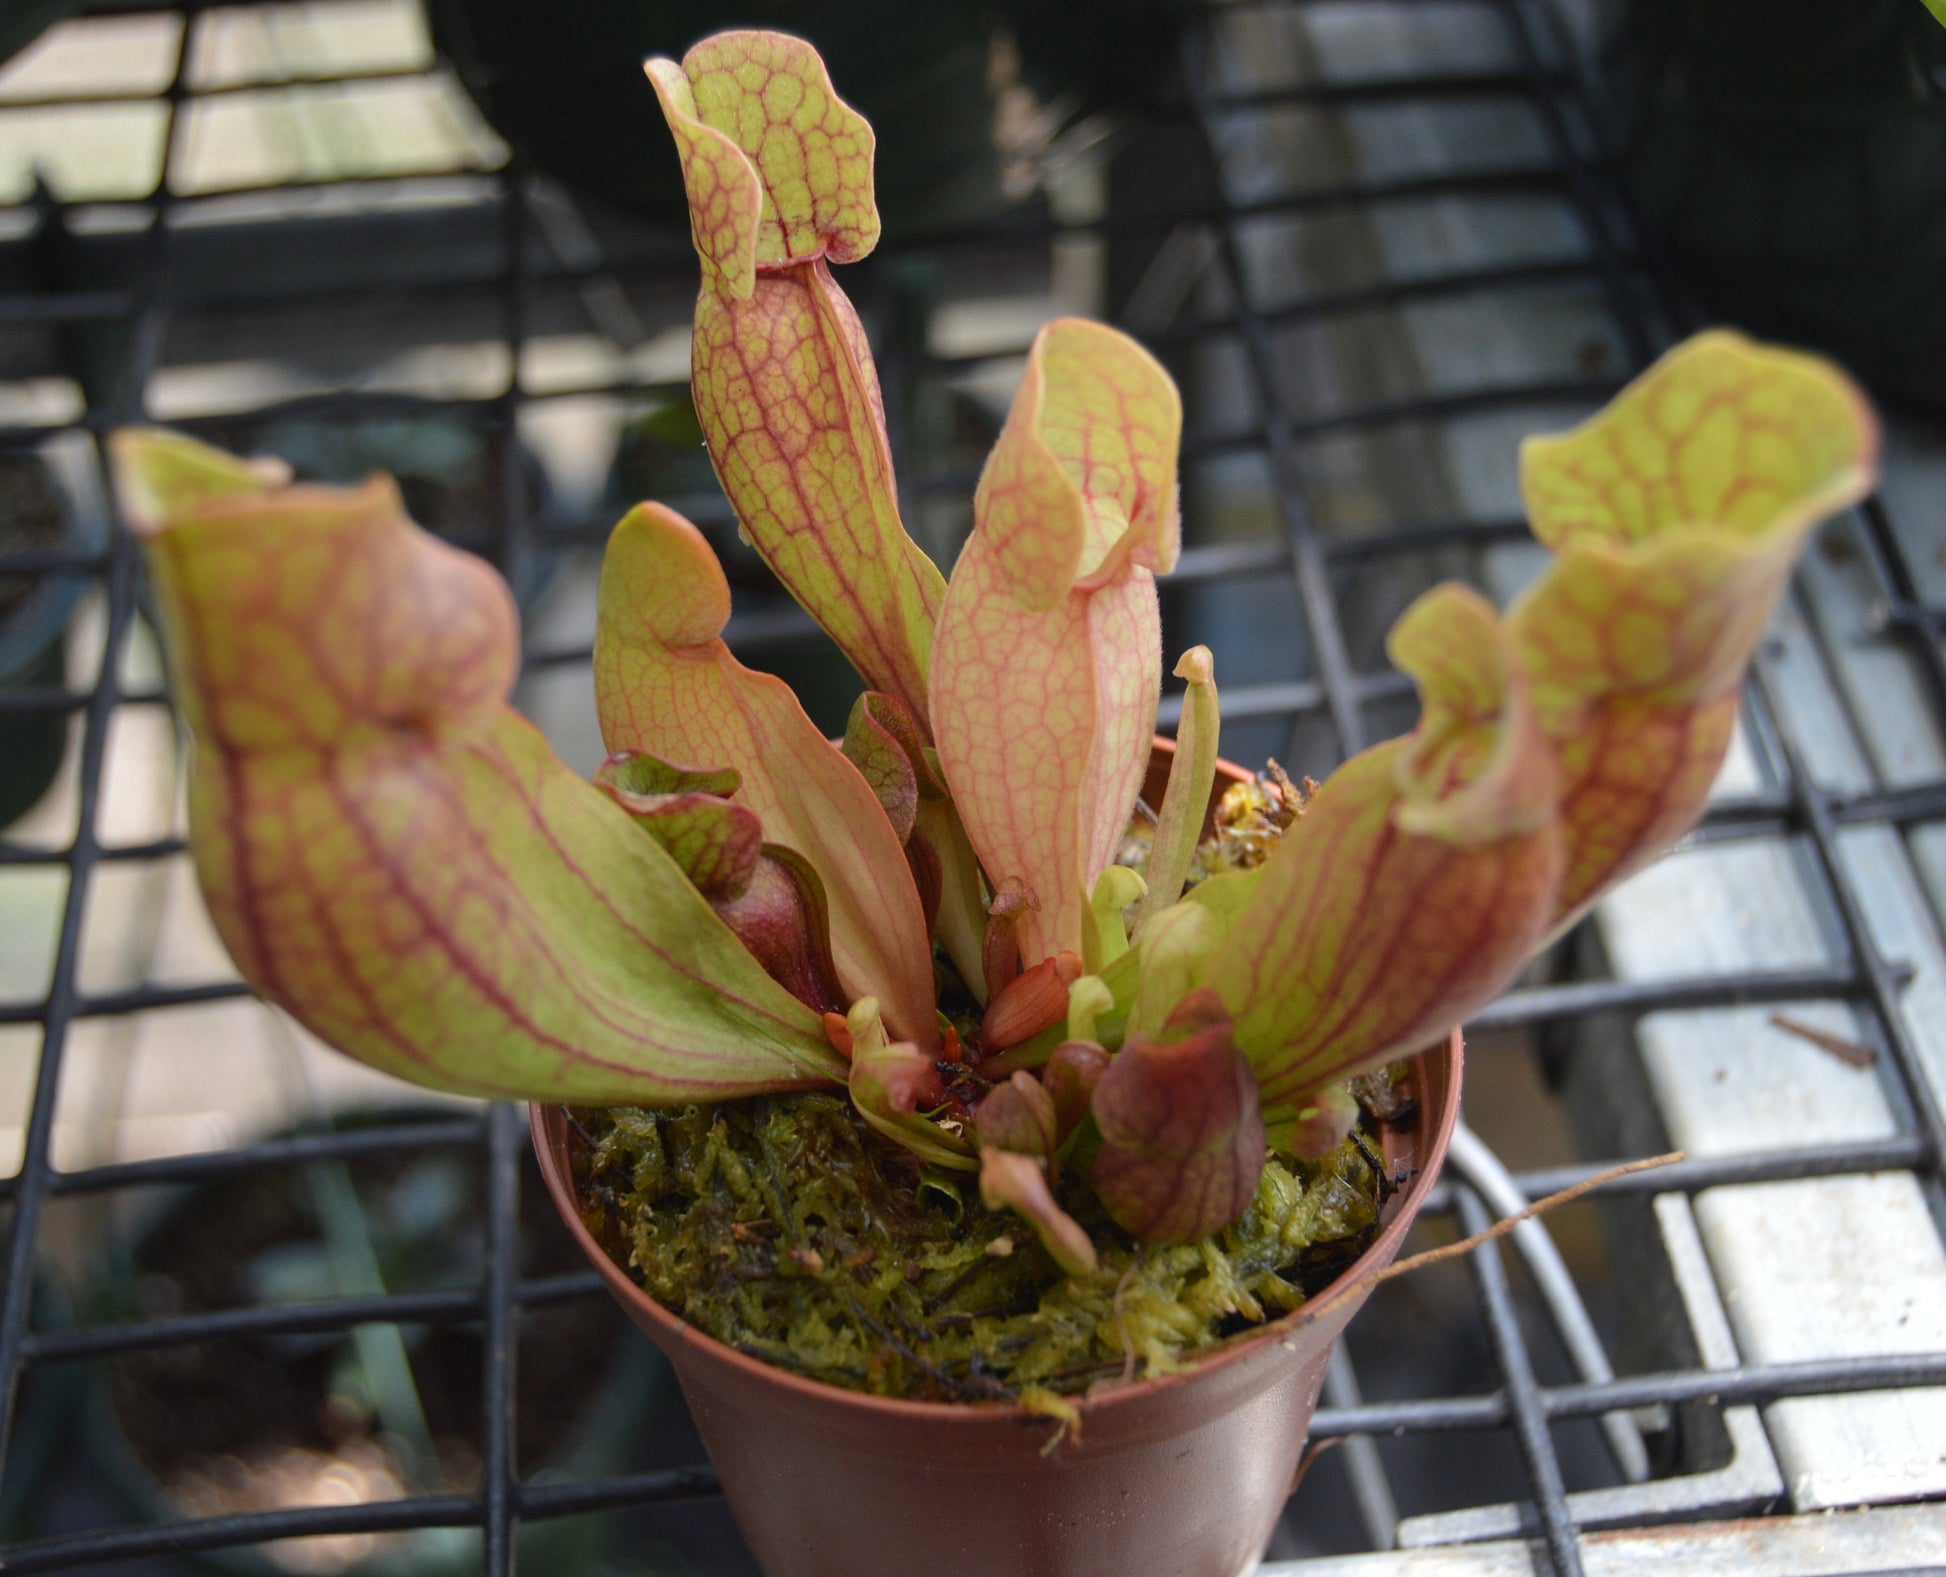 sarracenia purpurea can be grown in partial shade to full sun where the pitchers will turn from a green with red veins to a deep red/purple color they are in 3 inch pots